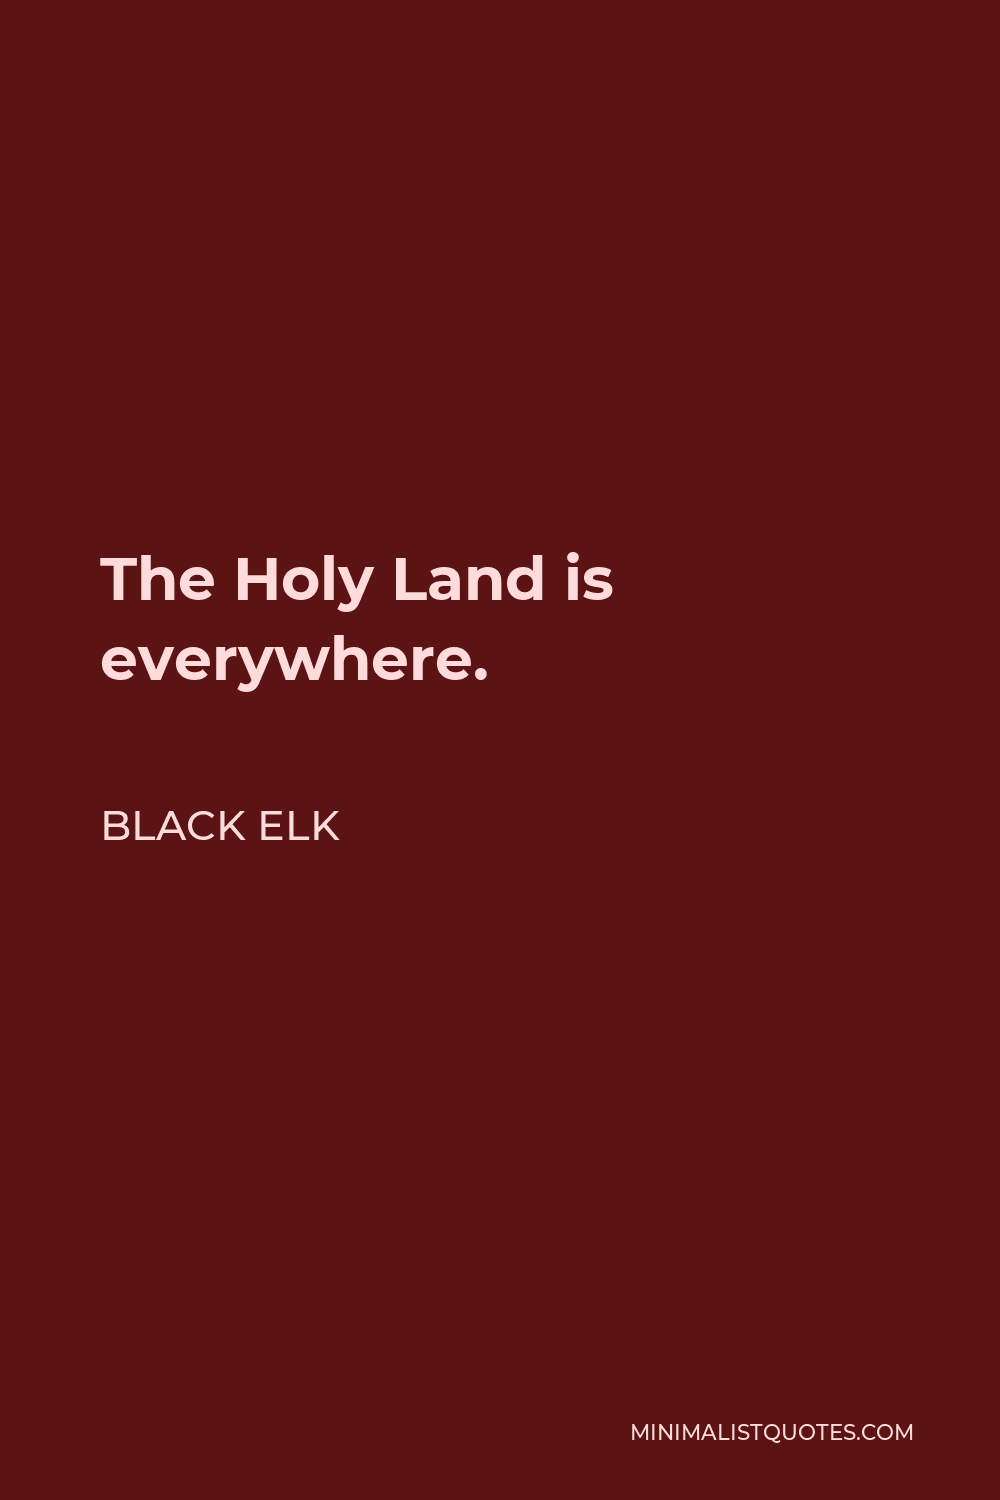 Black Elk Quote - The Holy Land is everywhere.